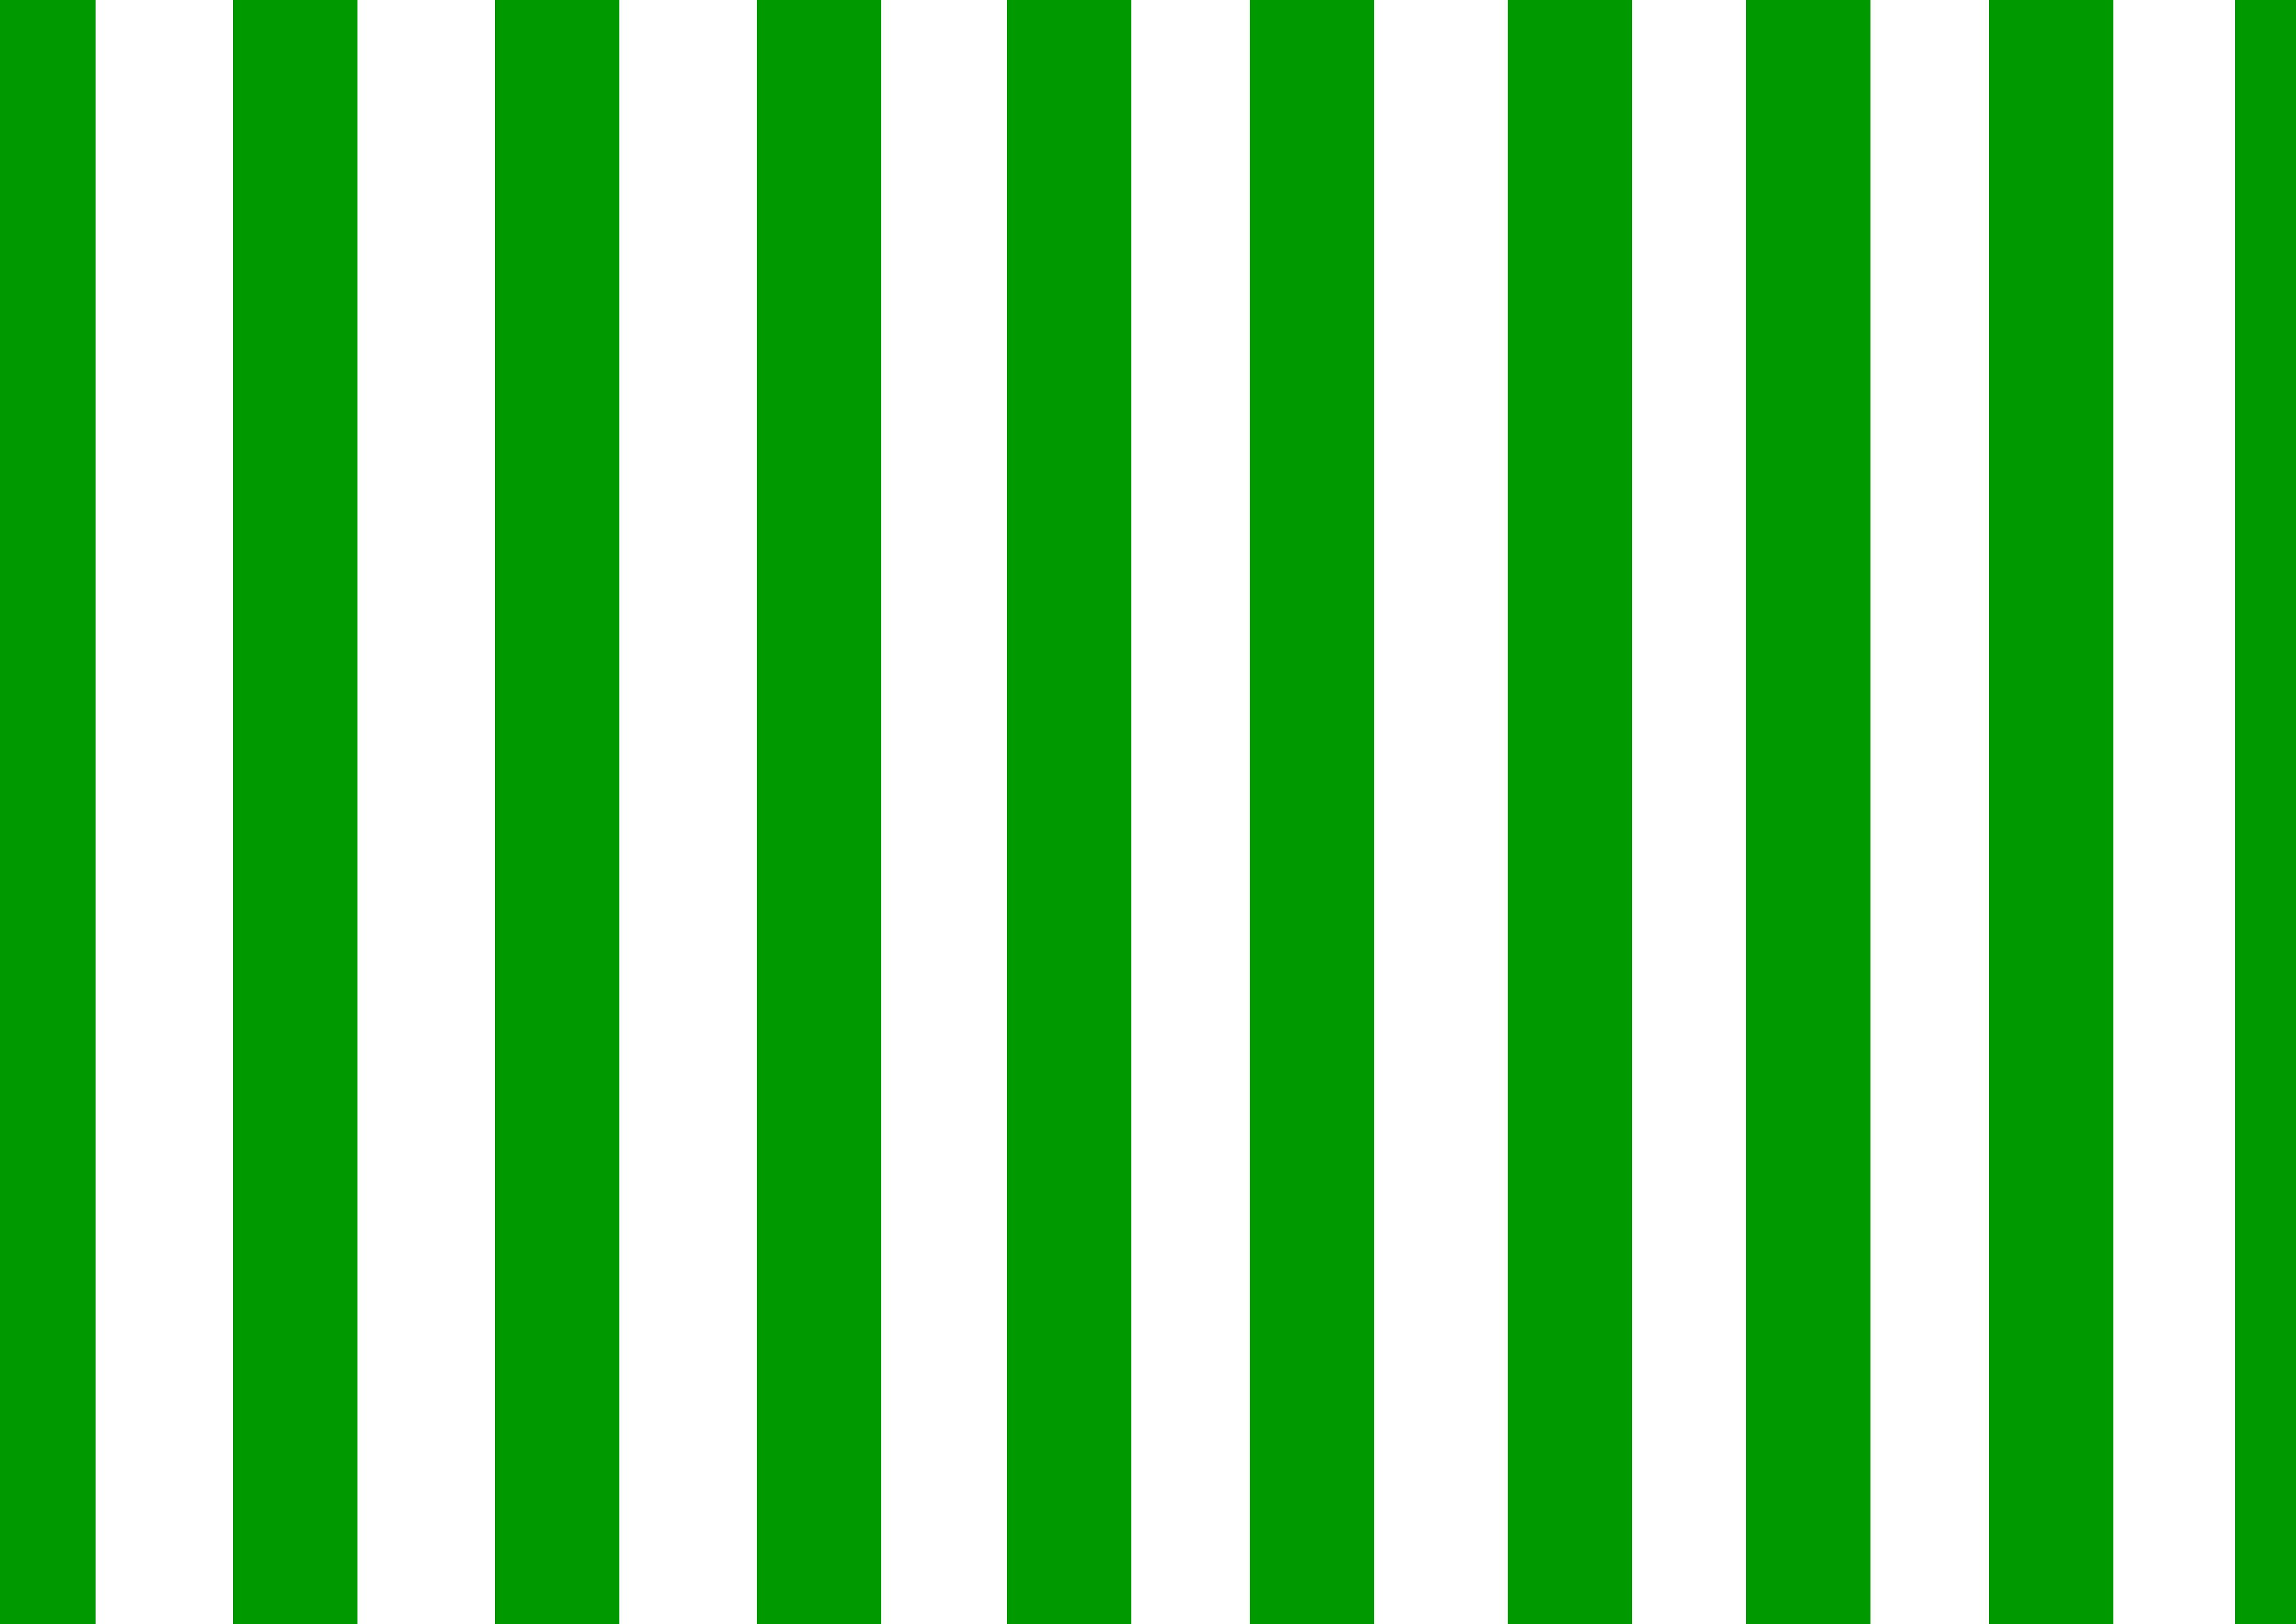 Green stripe background. Green striped abstract background